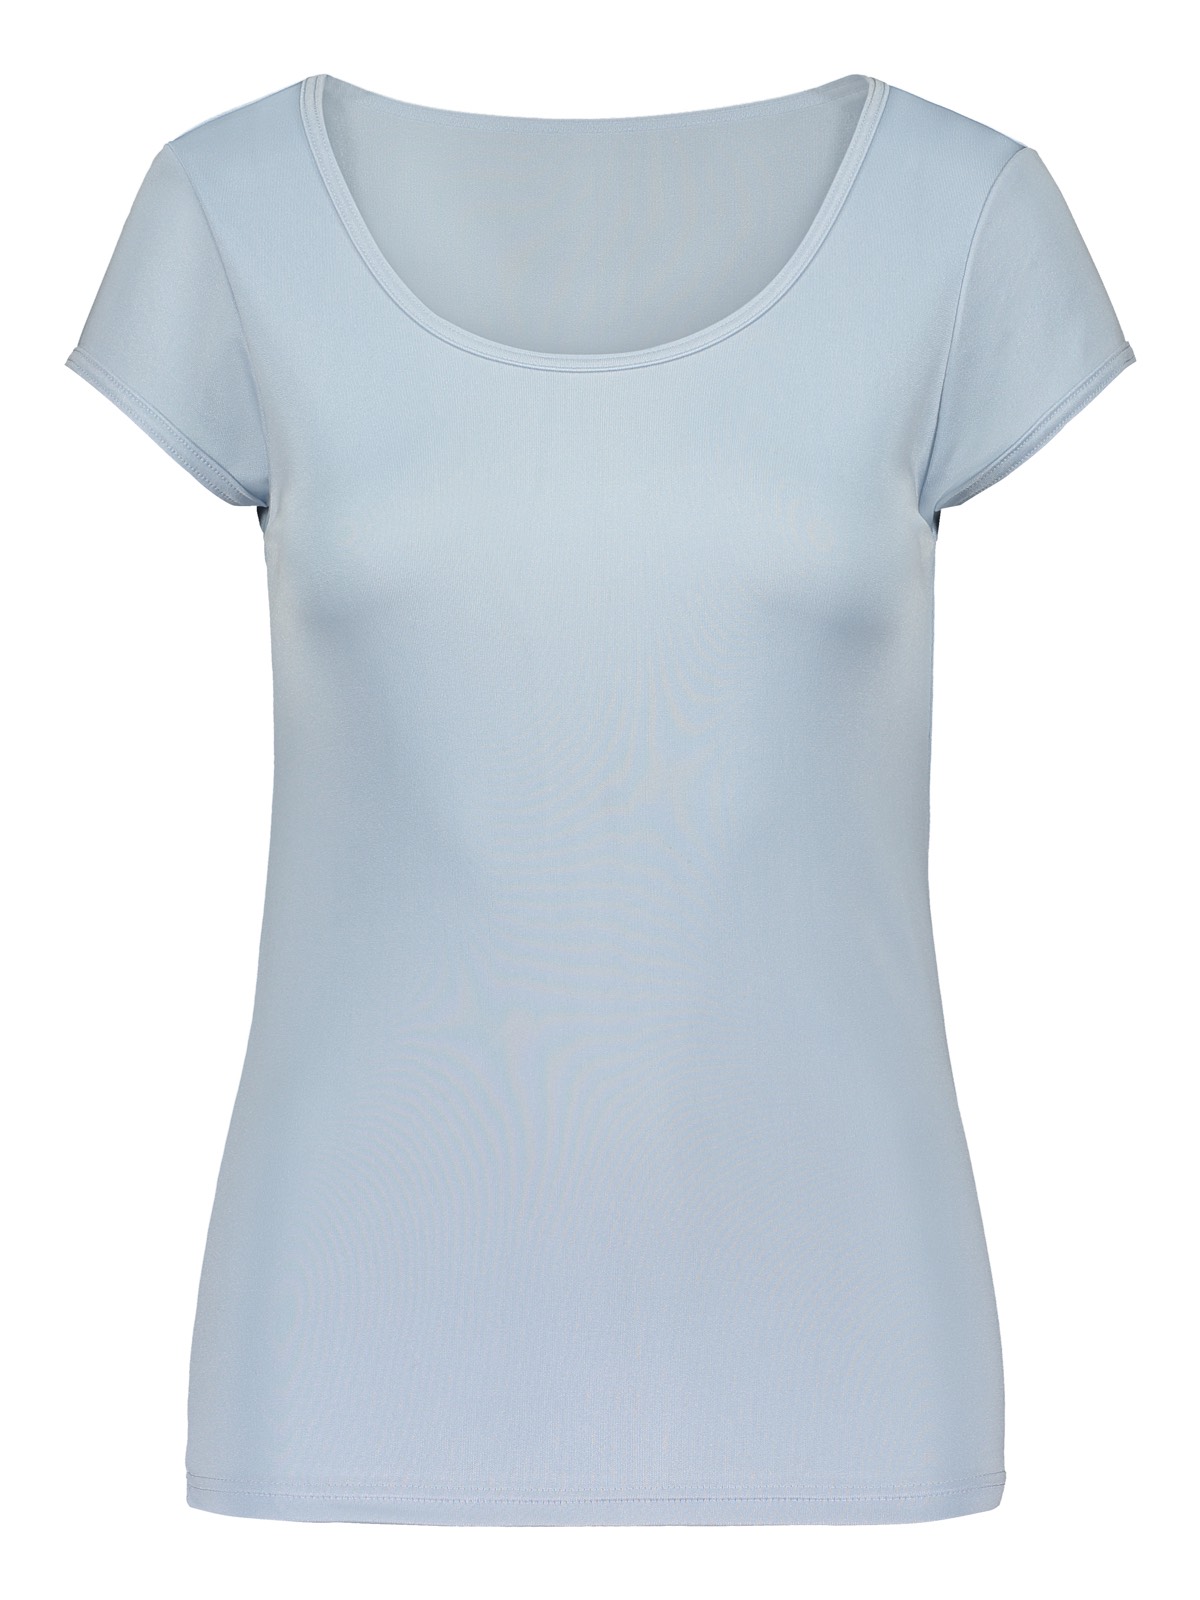 Ruskovilla's adult's organic silk Top with short sleeves